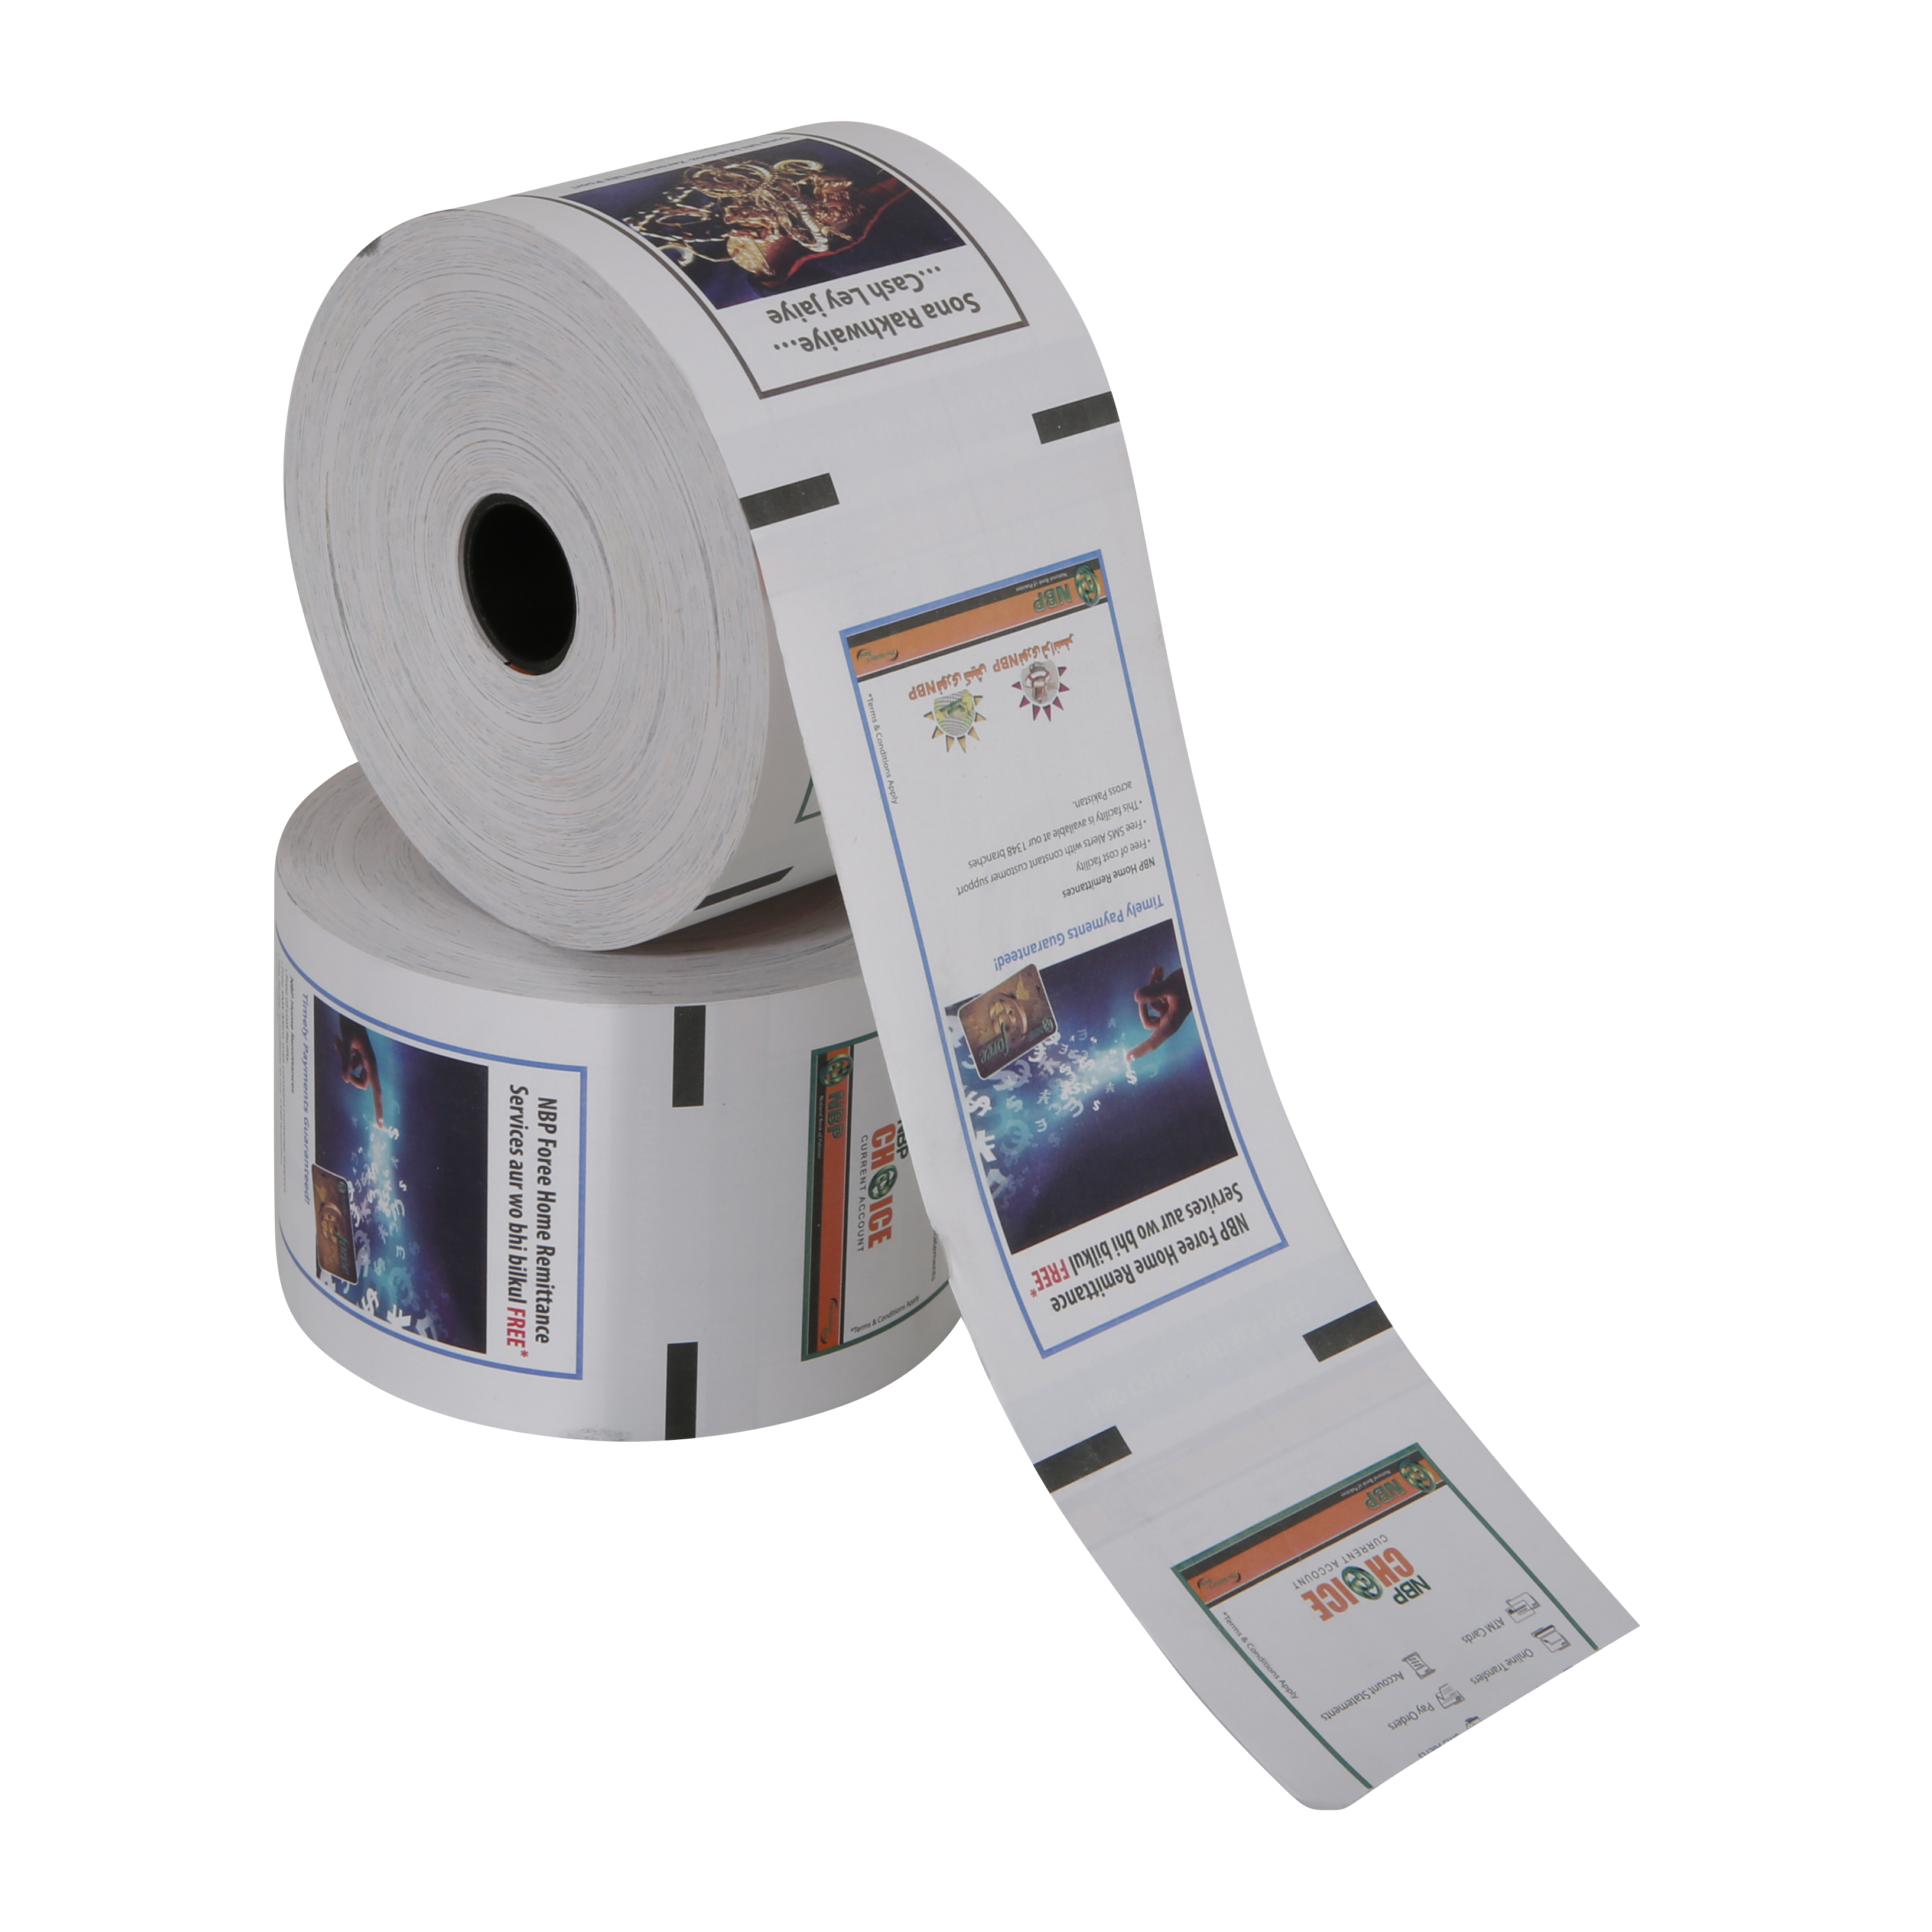 Printed 57mmx40mm atm roll cash register thermal paper